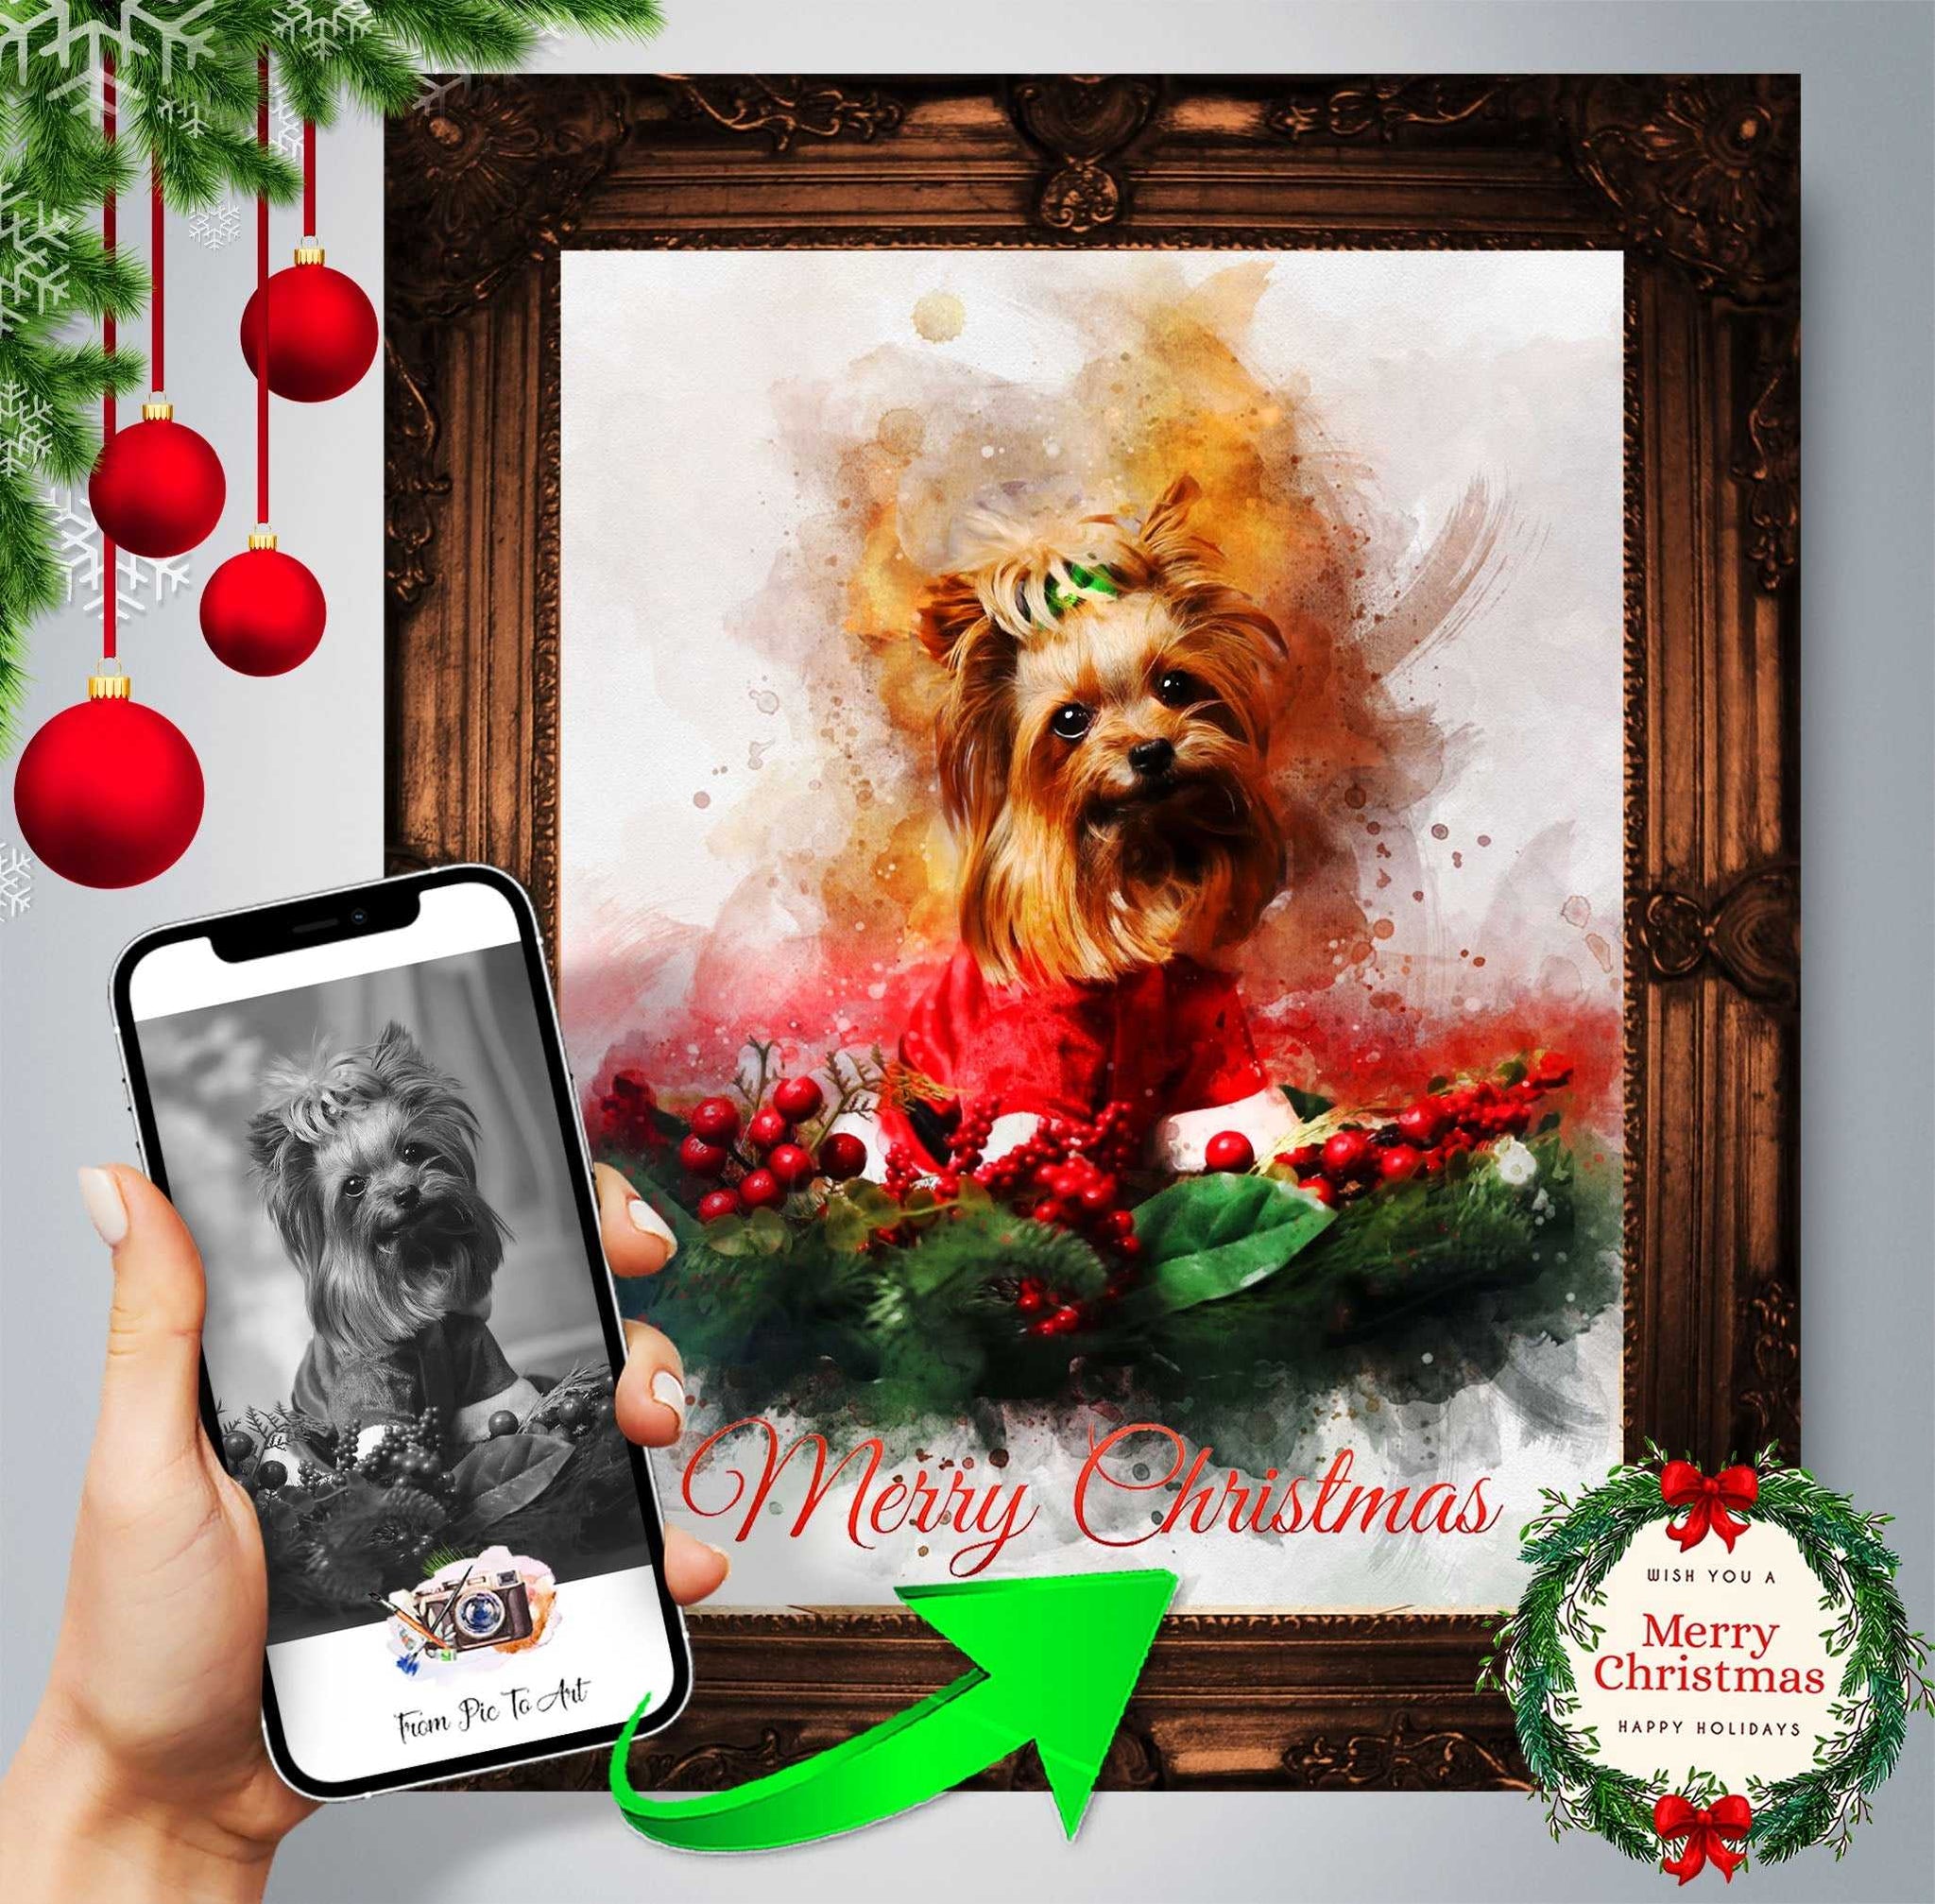 Ideas for Christmas Gifts | Christmas Presents | Christmas Gift Suggestions - FromPicToArt